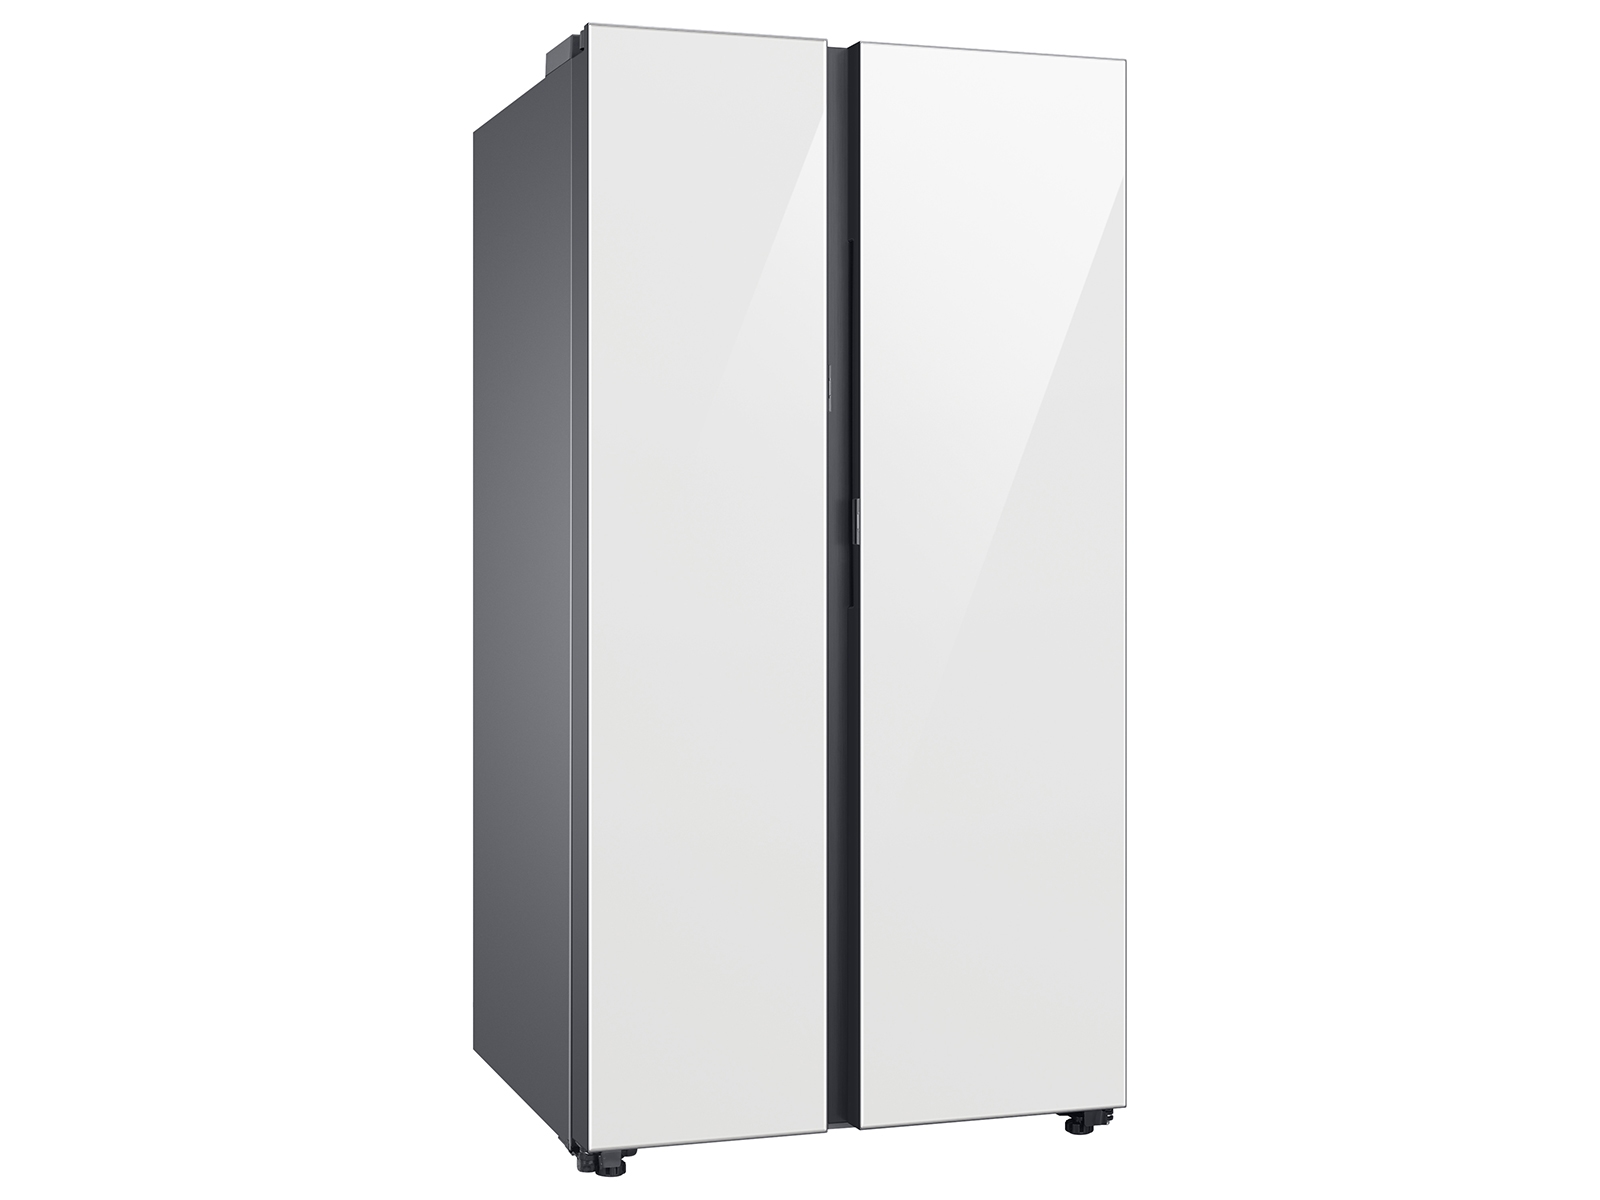 Bespoke 28 cu. ft. Beverage Center US with Samsung Refrigerator Side-by-side White | in Glass